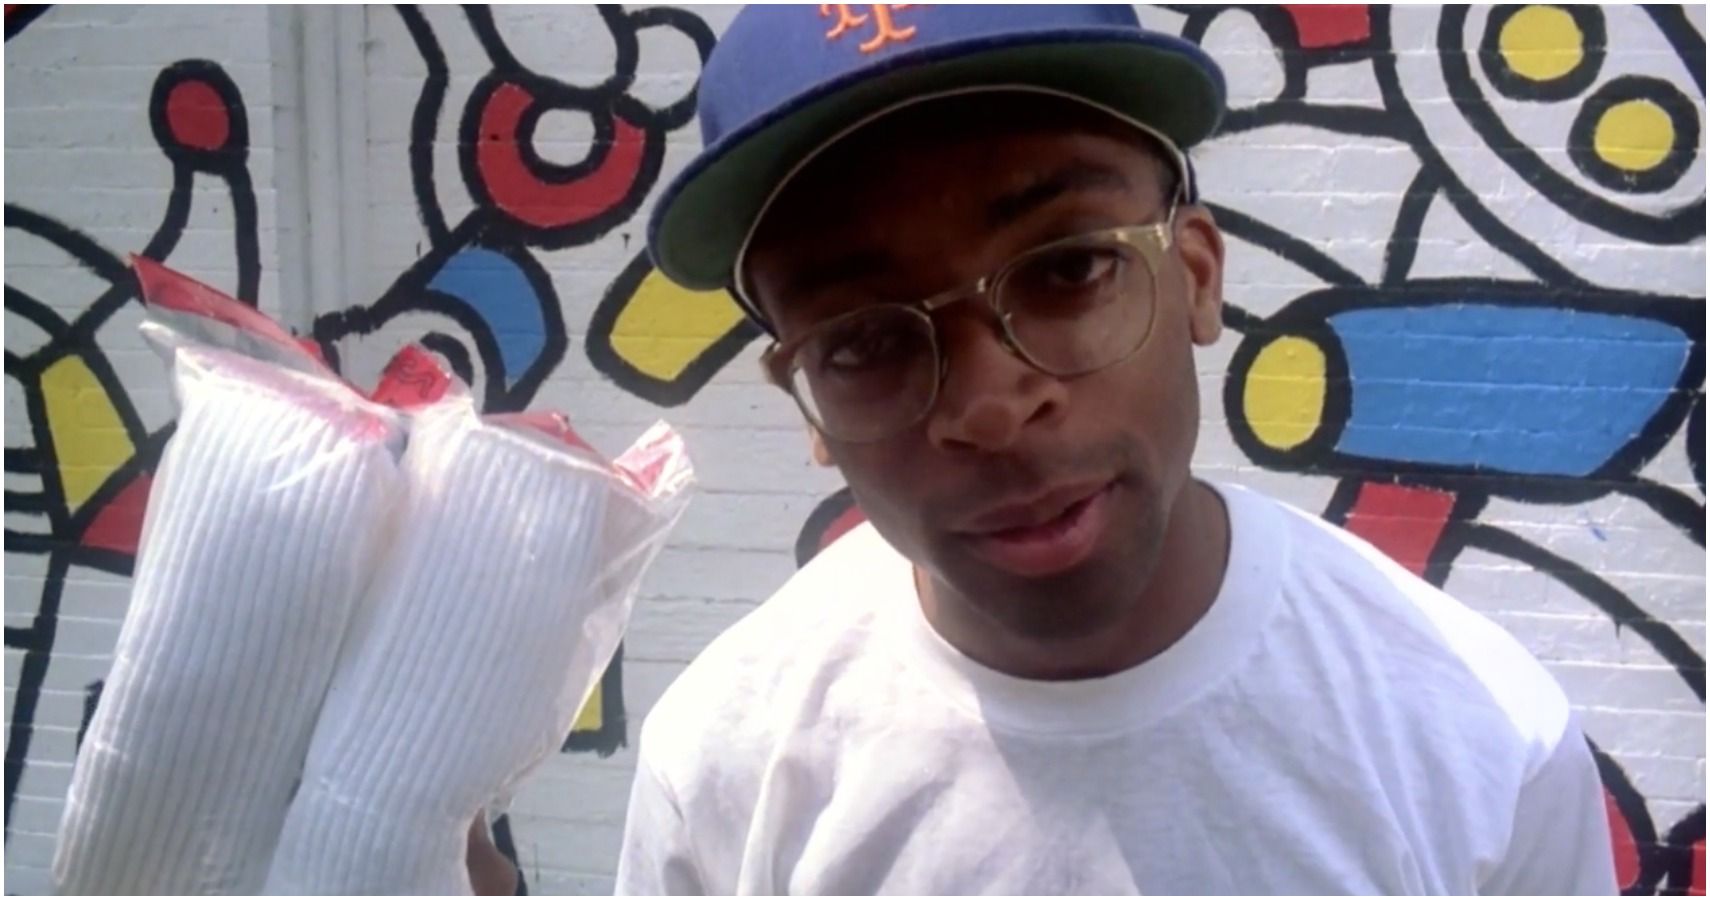 Spike Lee Movies and Series, Ranked by Tomatometer